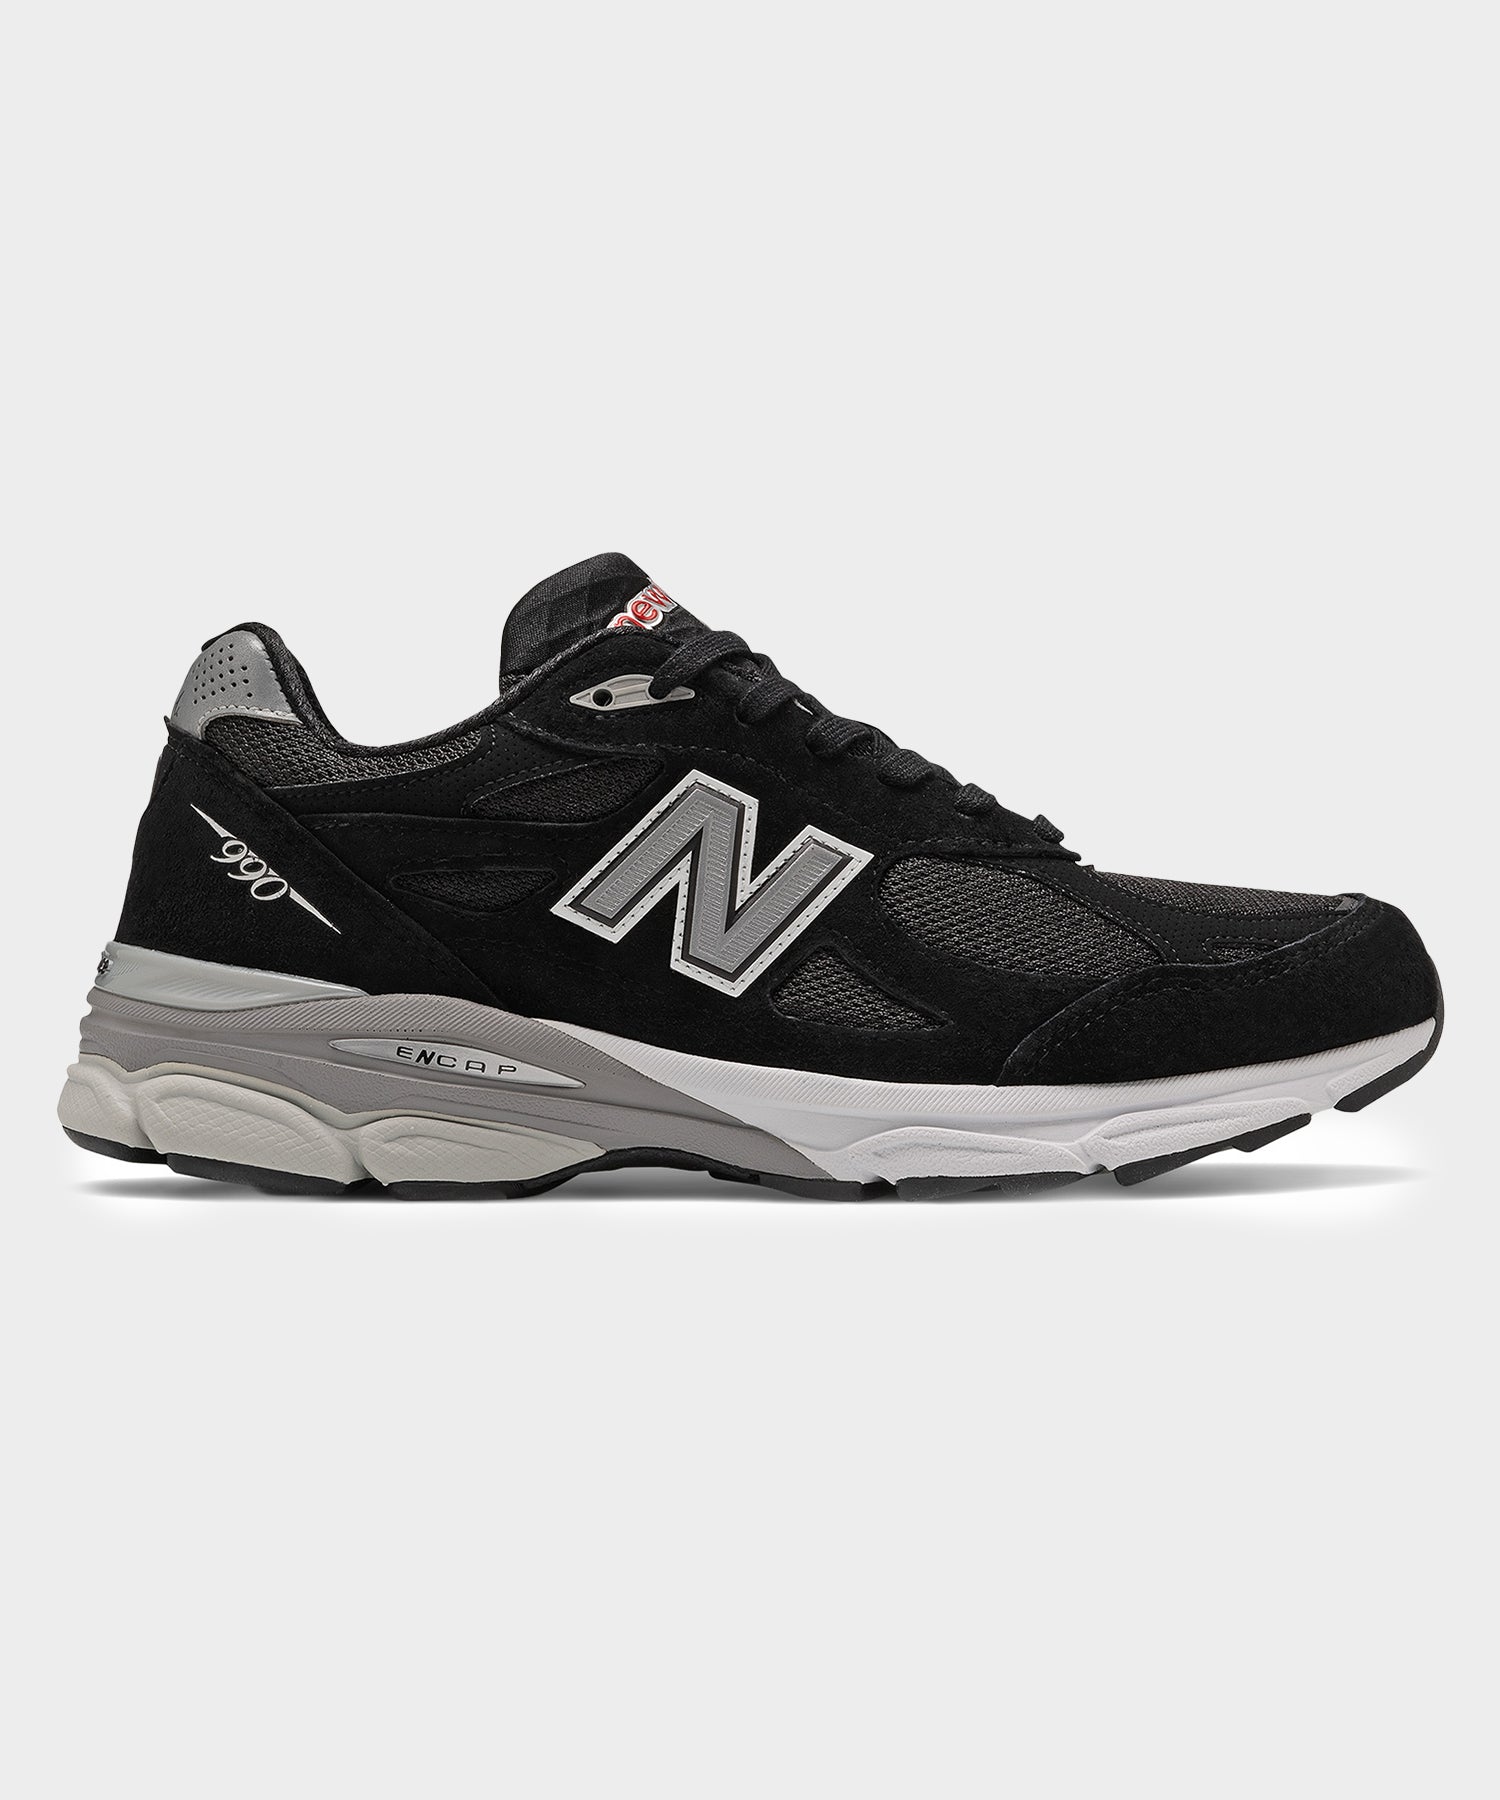 Made In the US 990 in Black